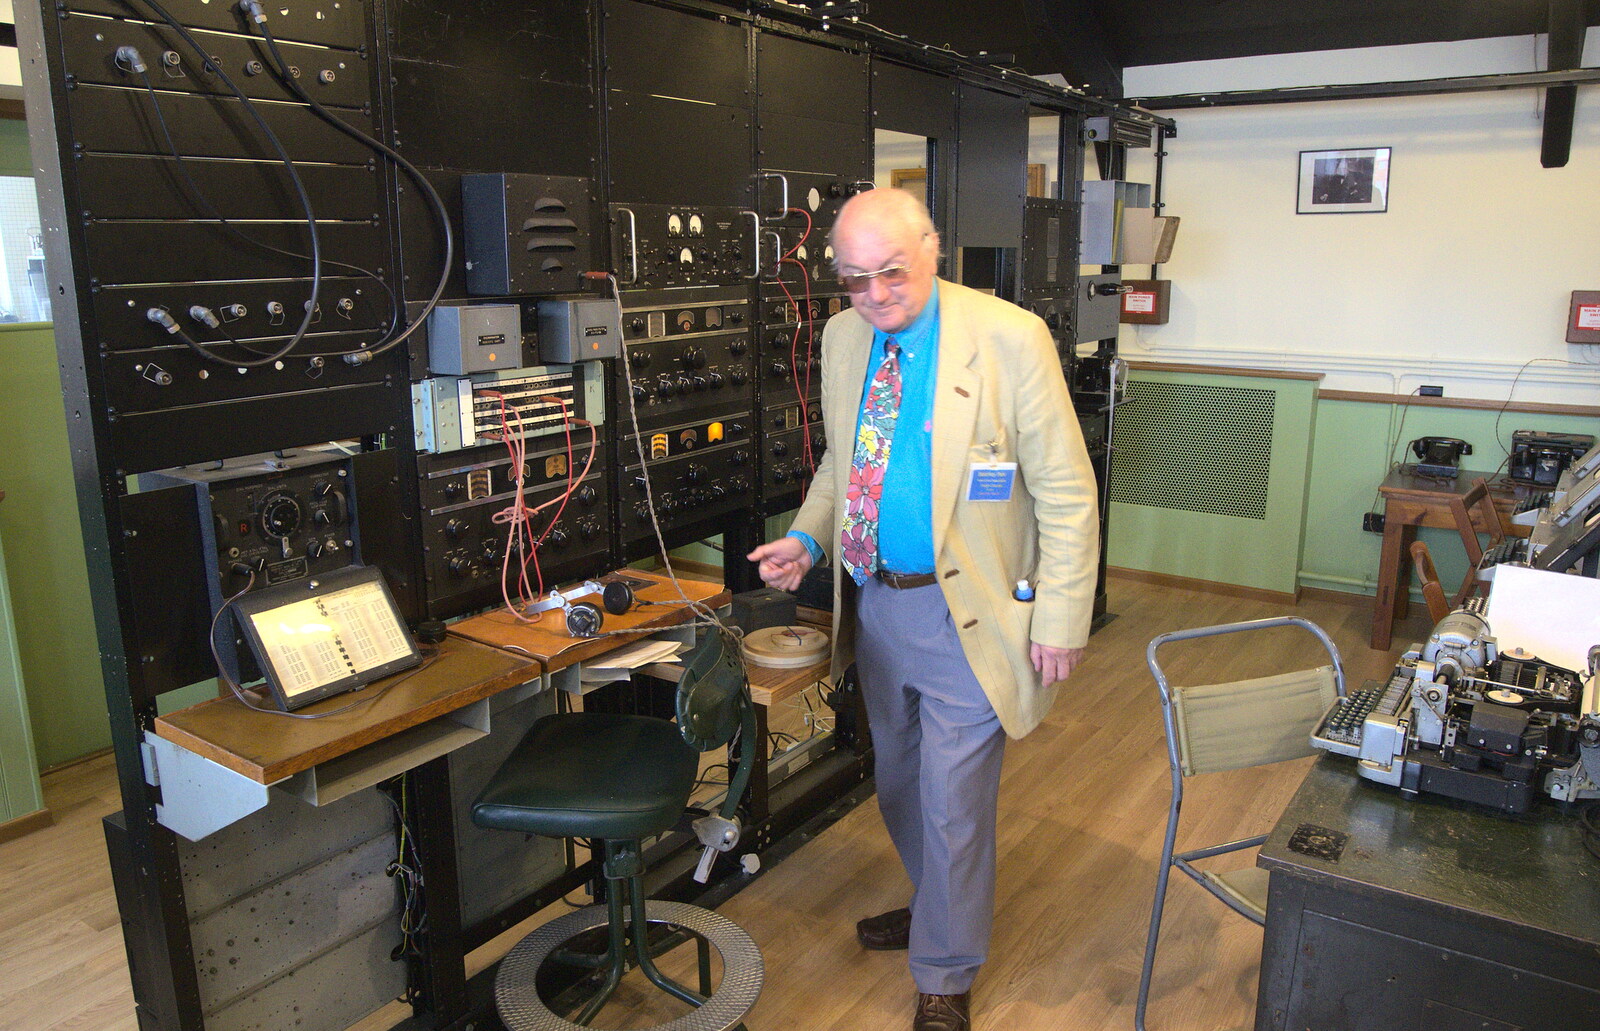 The tour guide shows us the 'radio room' from TouchType does Bletchley Park, Bletchley, Bedfordshire - 20th July 2012